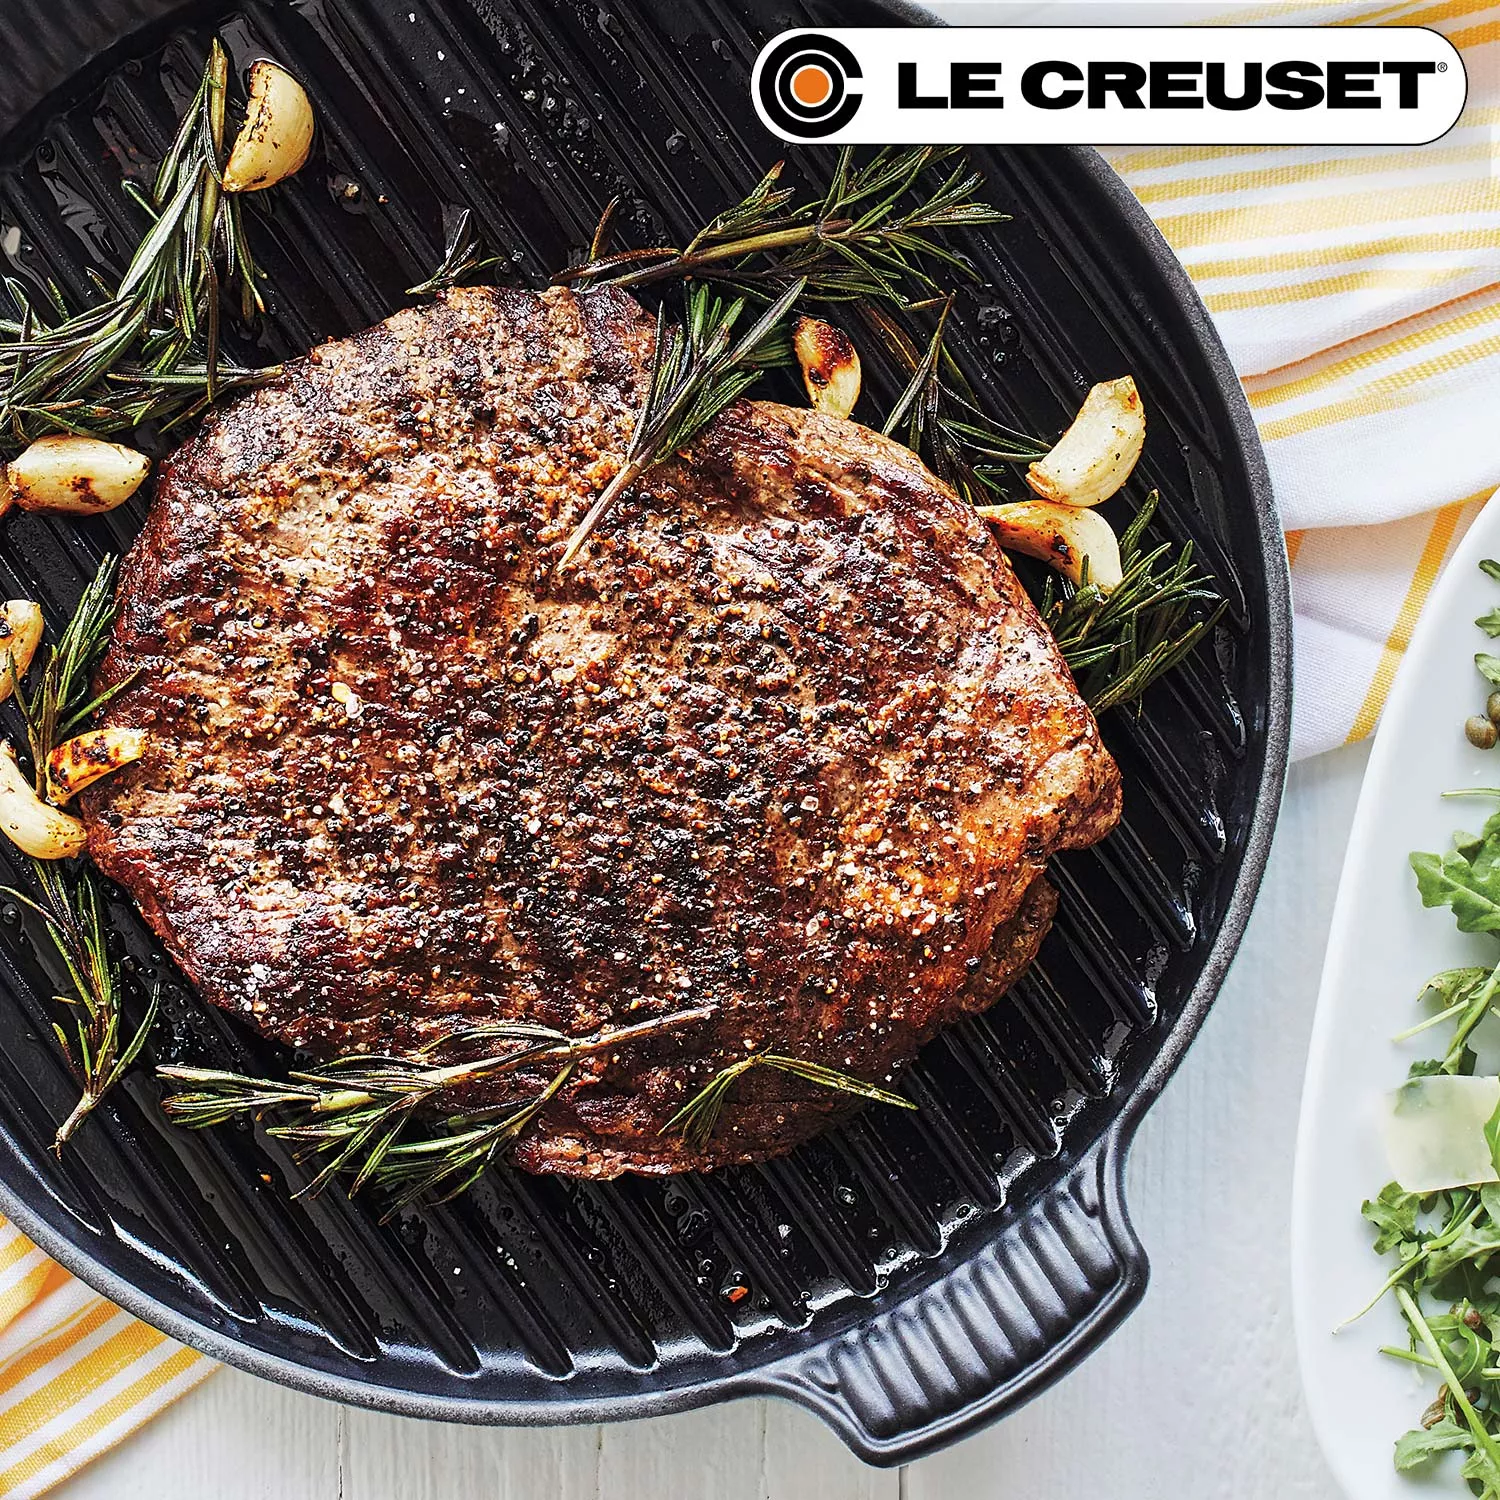 Searing Cast Iron Vs. Stainless Steel - What's Best For Your Steak? -  Virginia Boys Kitchens